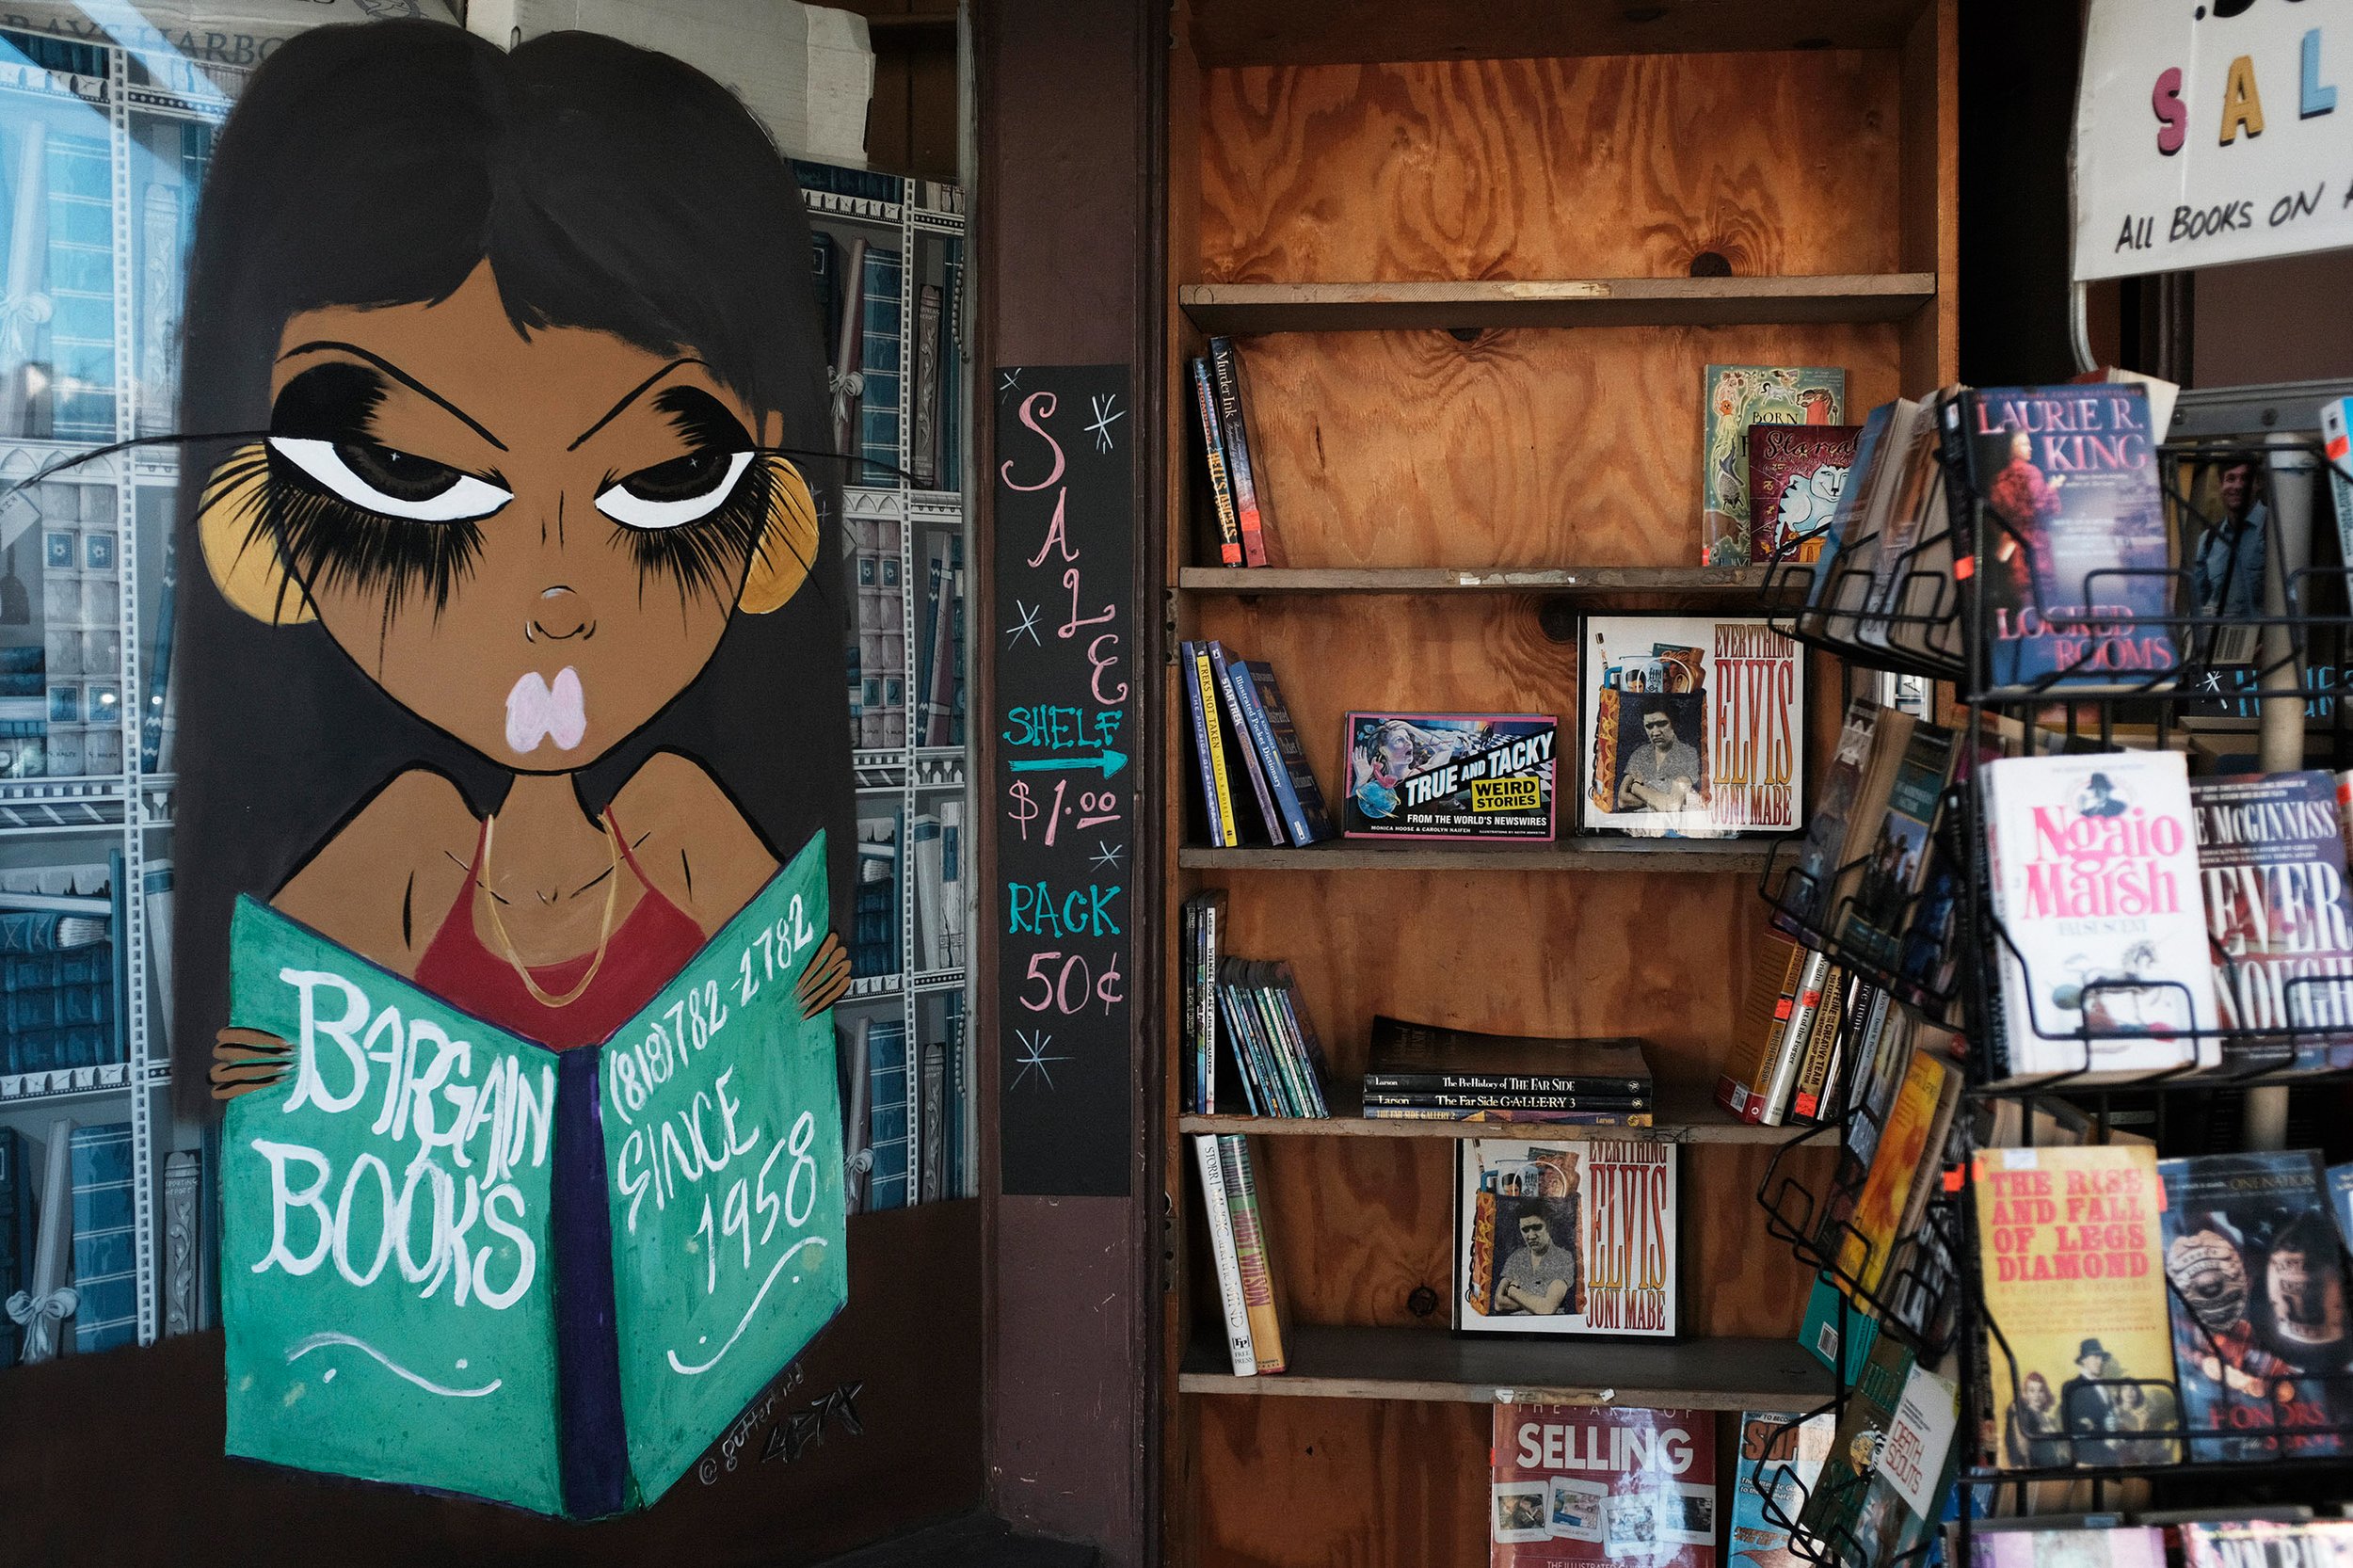  The front of the Bargain Book store features art by the artist written as 'streetkidd,’ of a woman holding a book that shows the shop’s telephone number, and “Since 1958”. There are a few racks of books in the front of the store for .50 and a $1 she